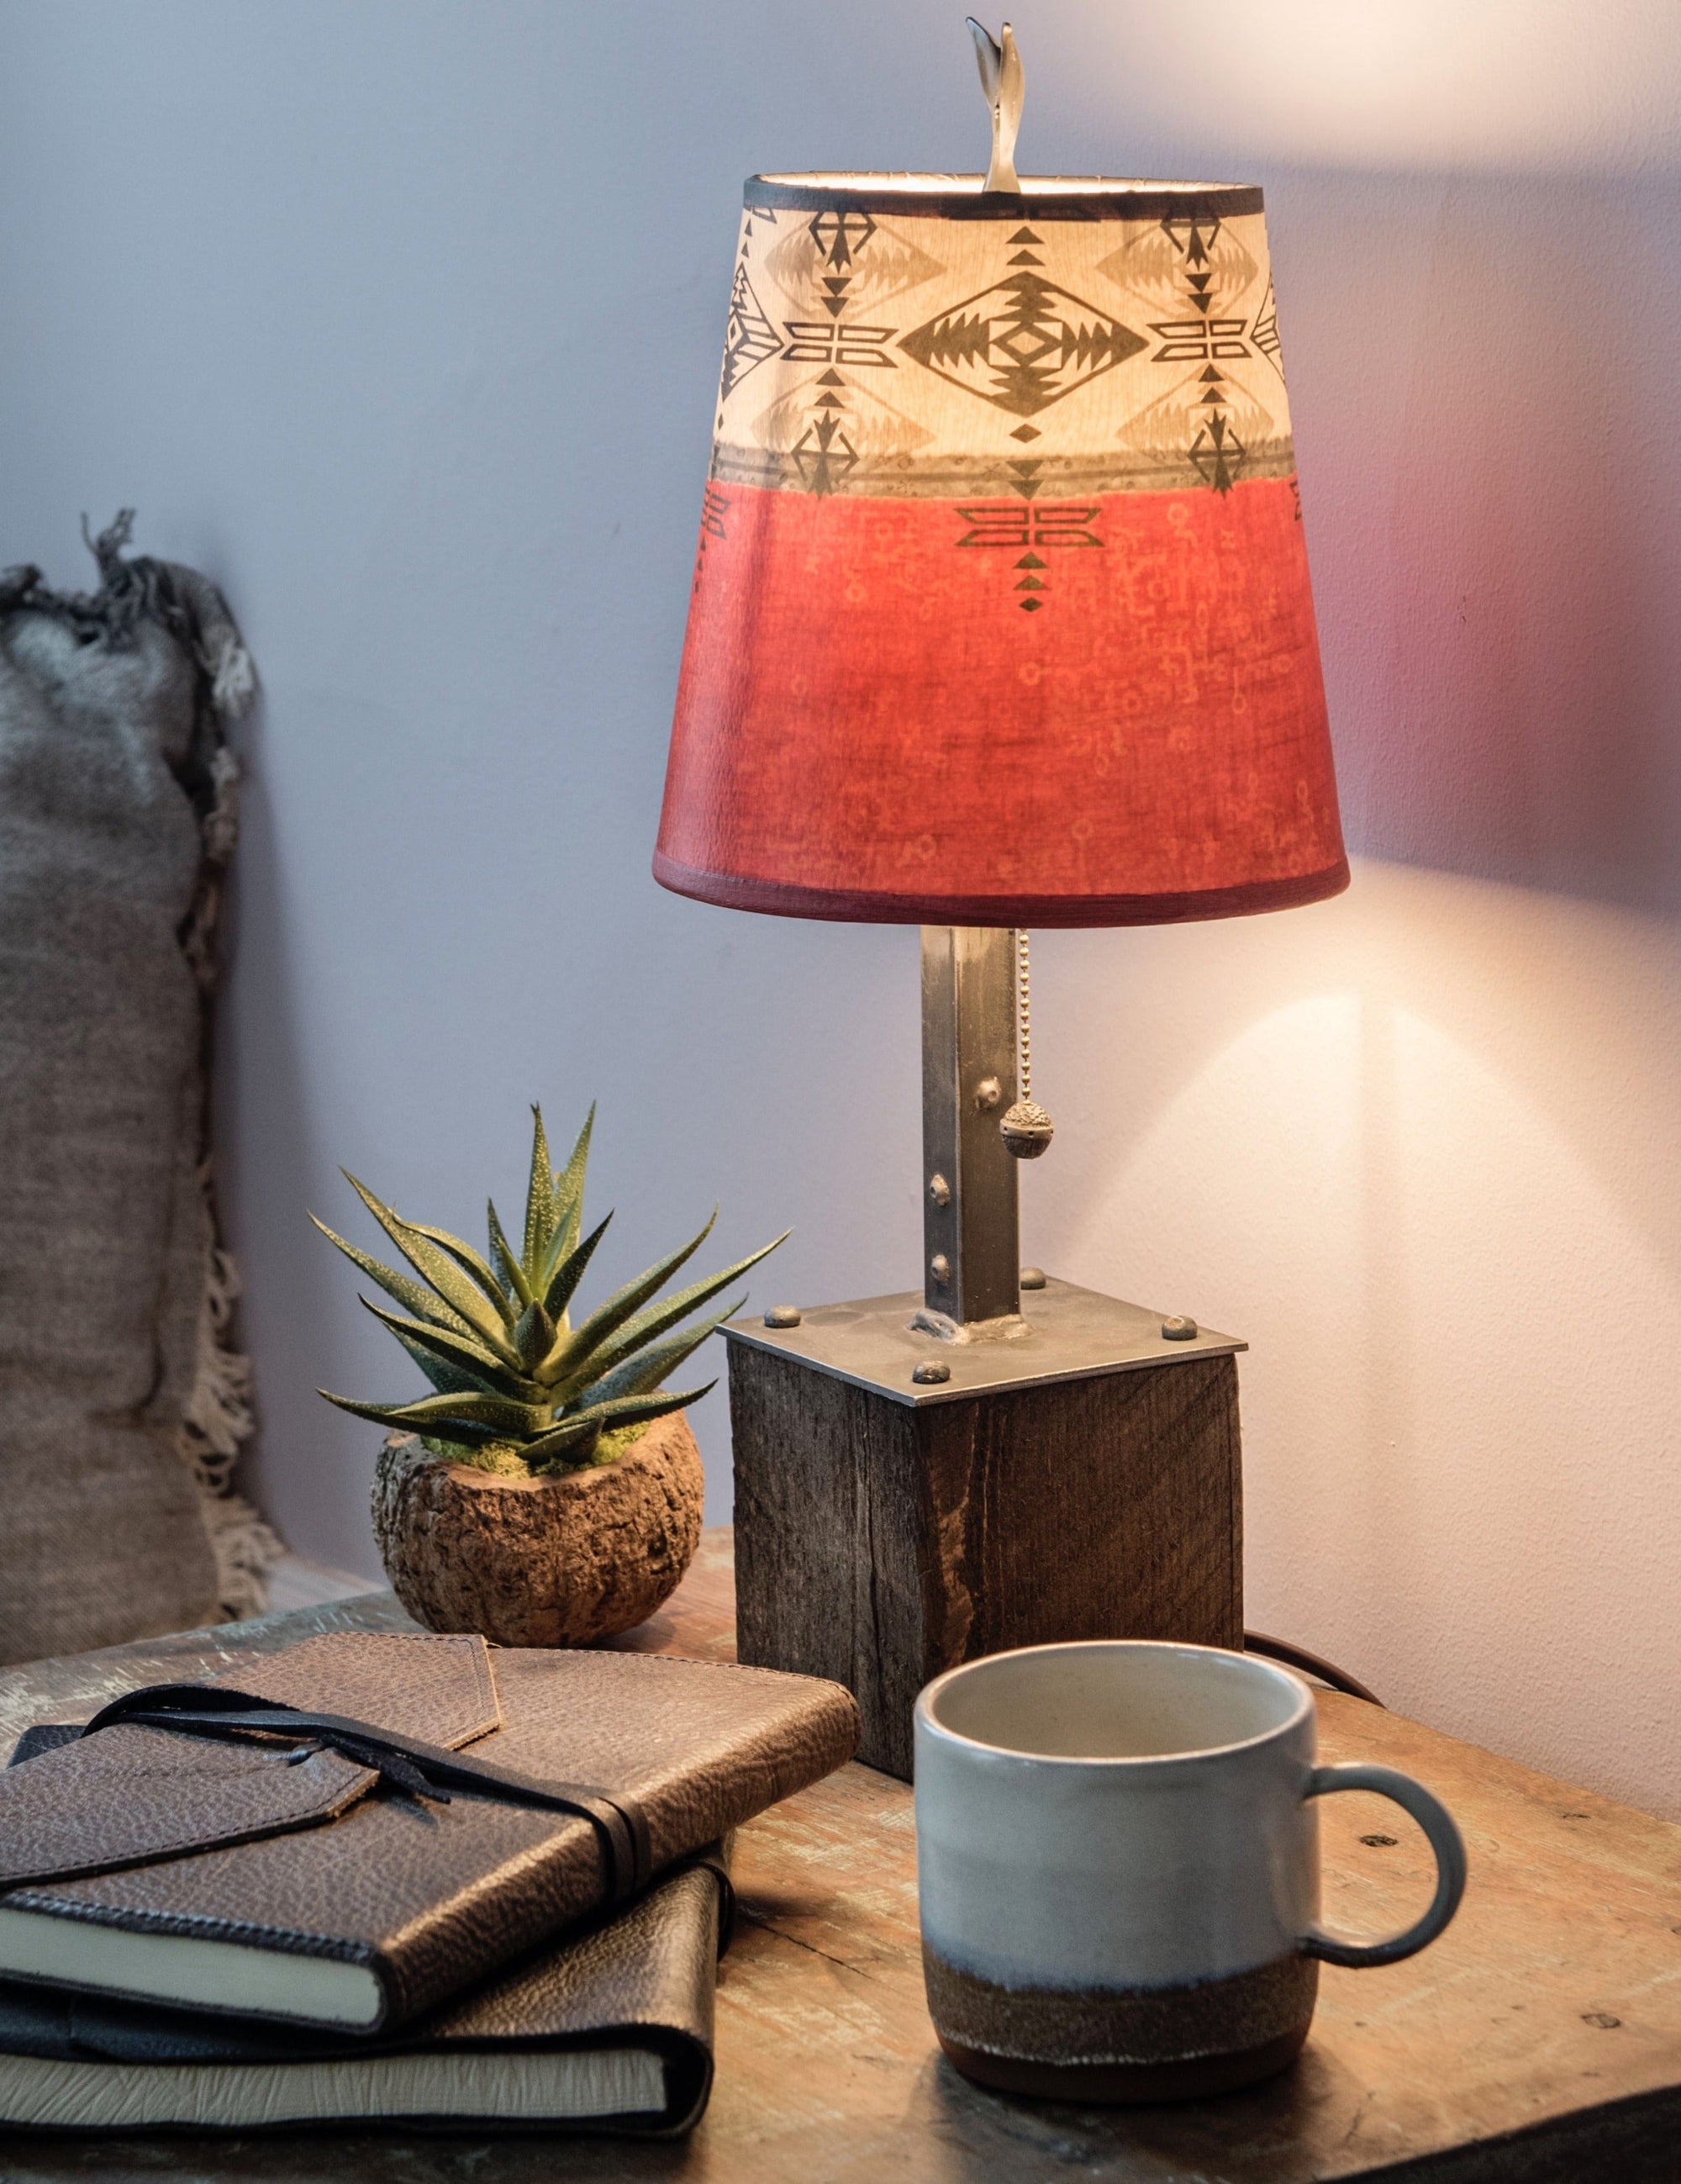 Janna Ugone & Co Table Lamps Steel Table Lamp on Reclaimed Wood with Small Drum Shade in Red Mesa